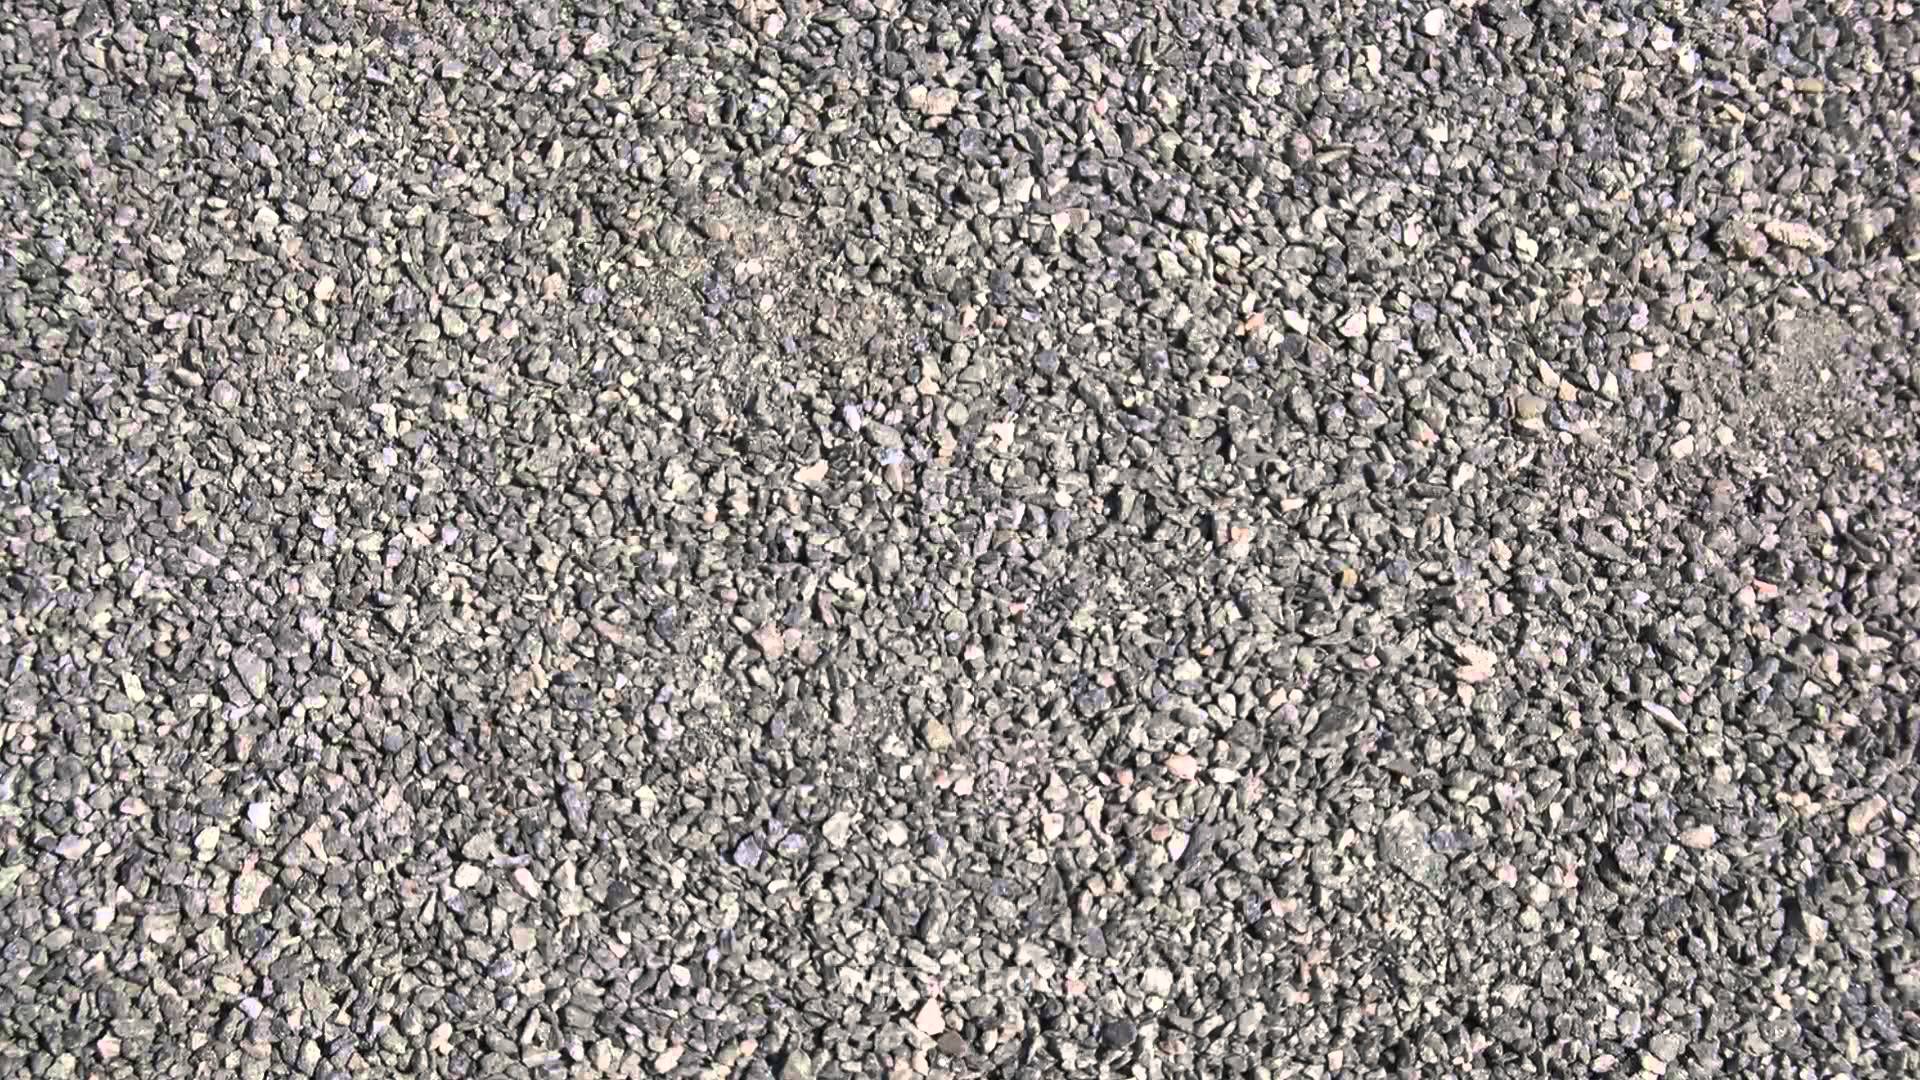 Gravel - Video Learning - WizScience.com - YouTube